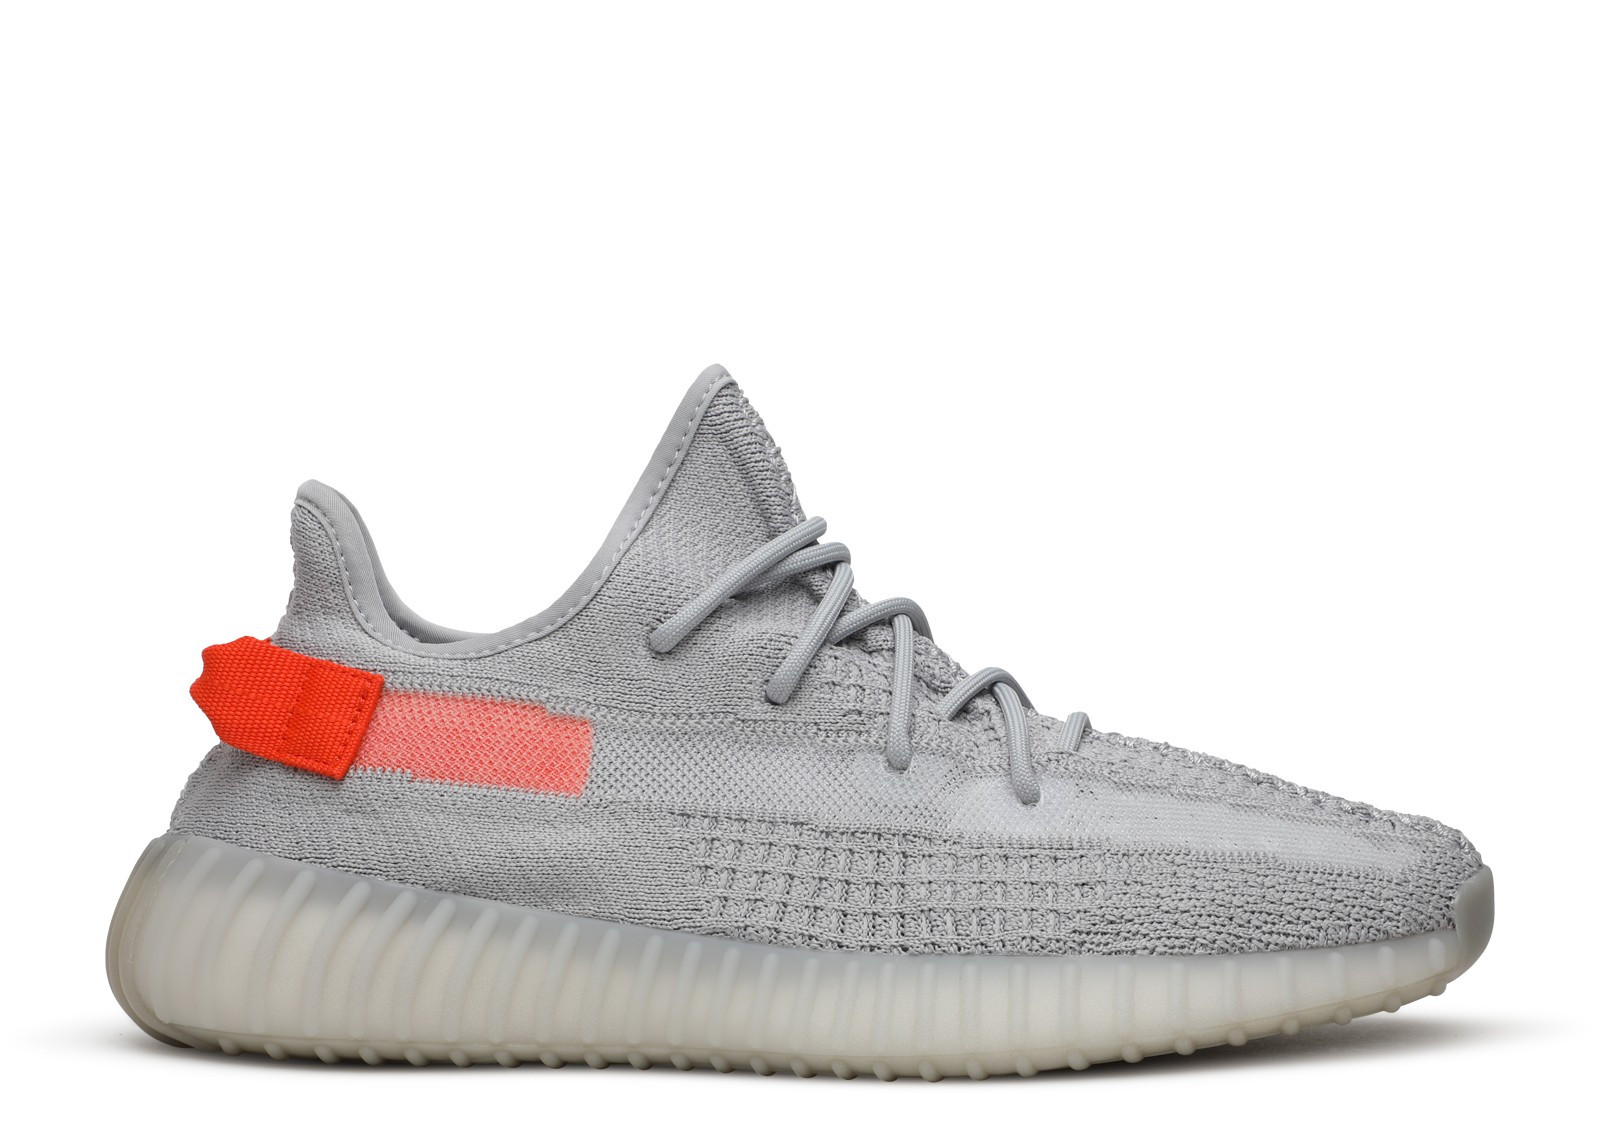 YEEZY BOOST 350 V2 TAIL LIGHT image 1